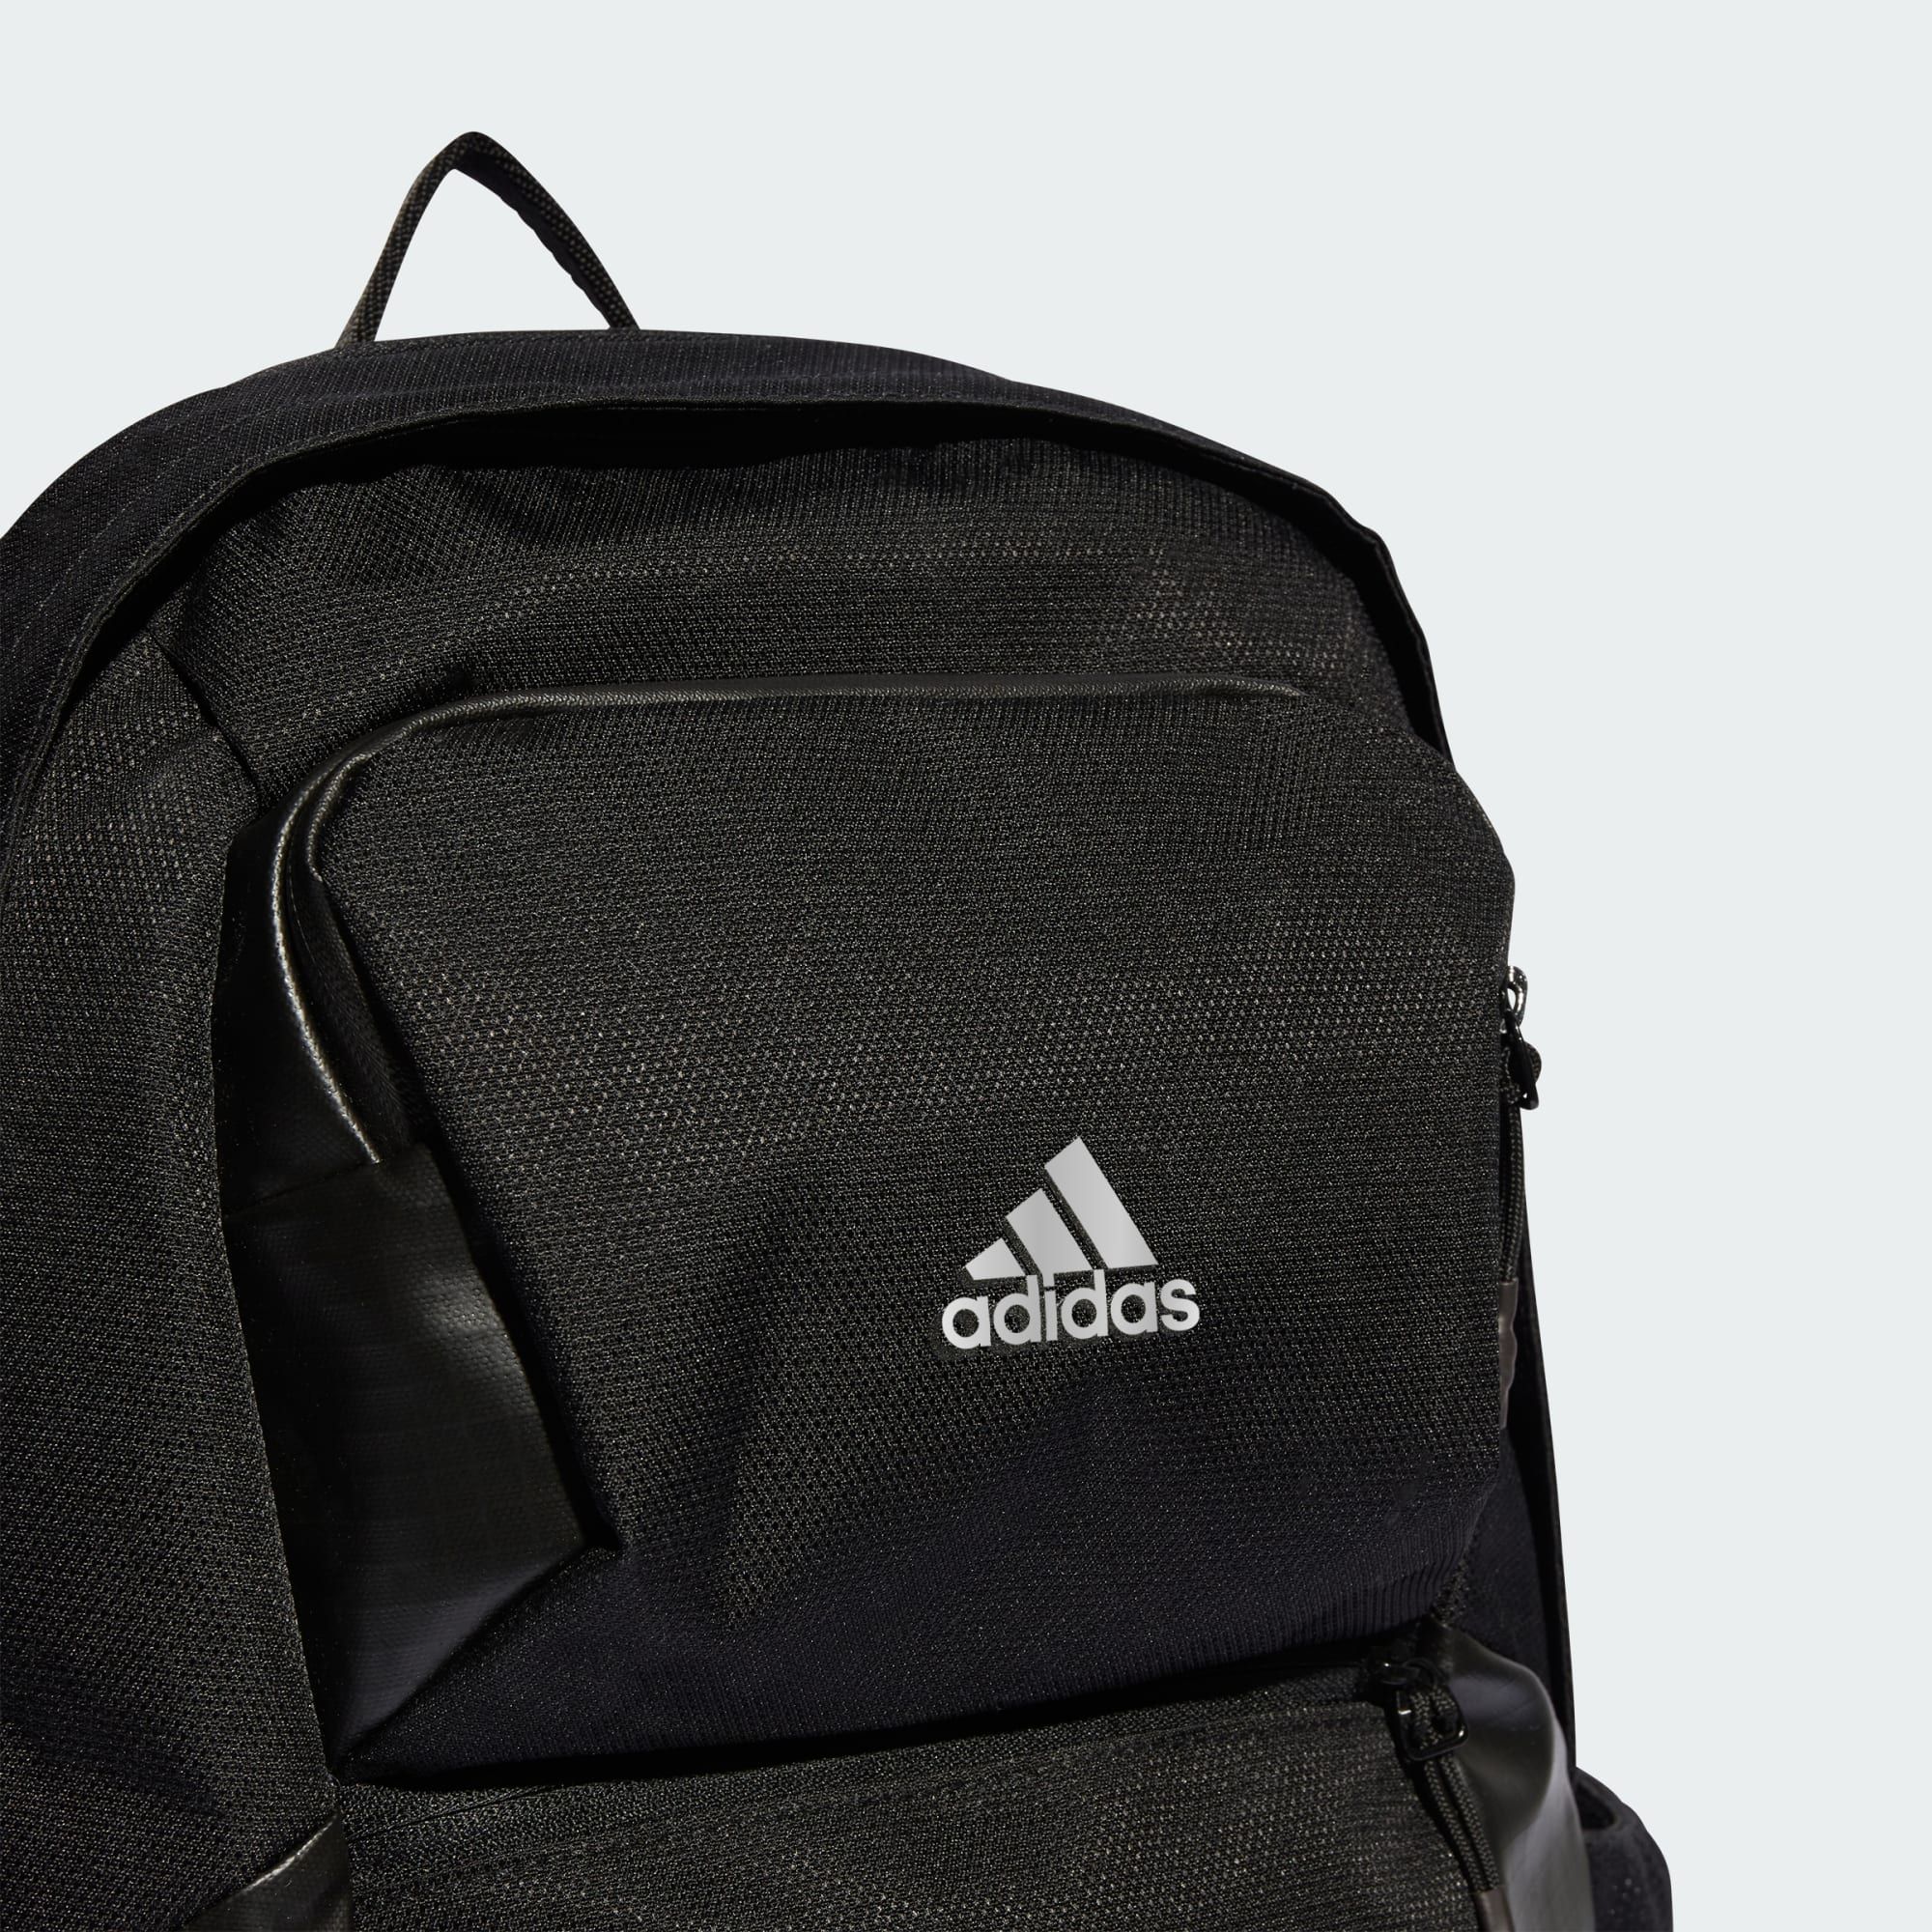  adidas 4CMTE Backpack - Black / Grey Two 